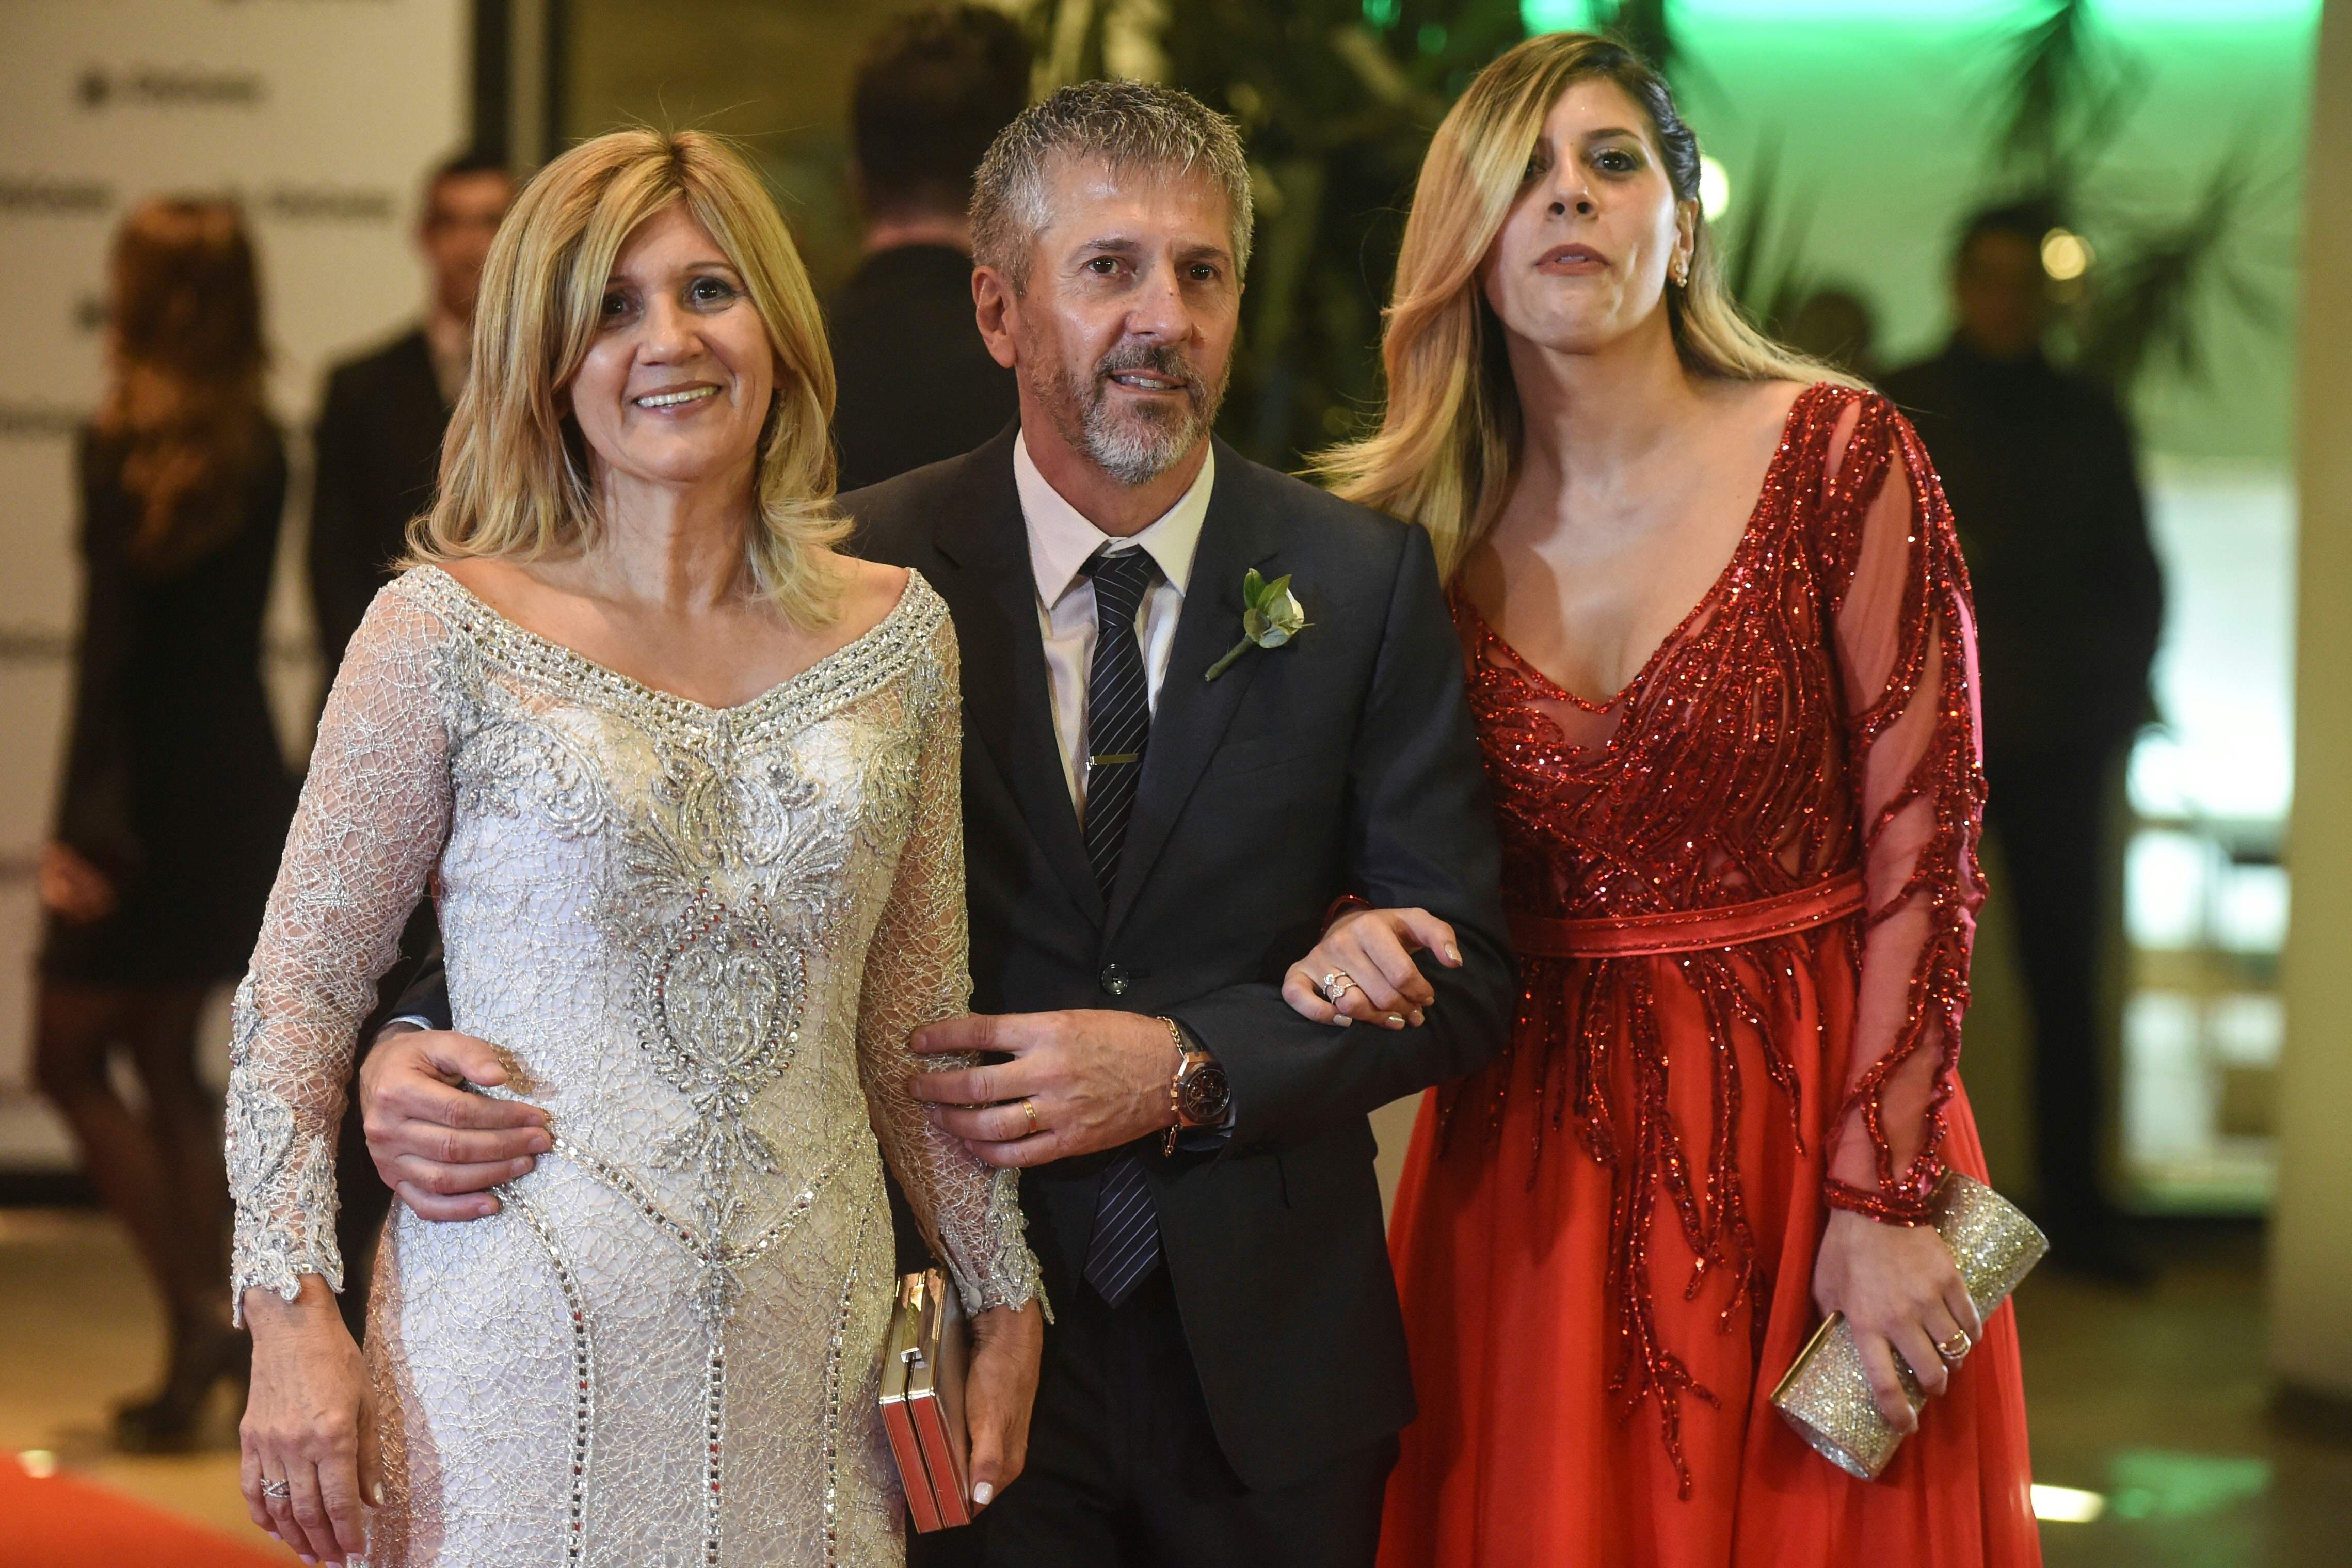 Messi's mum Celia - next to his dad Jorge and sister Maria - wore white to her son's wedding in 2017